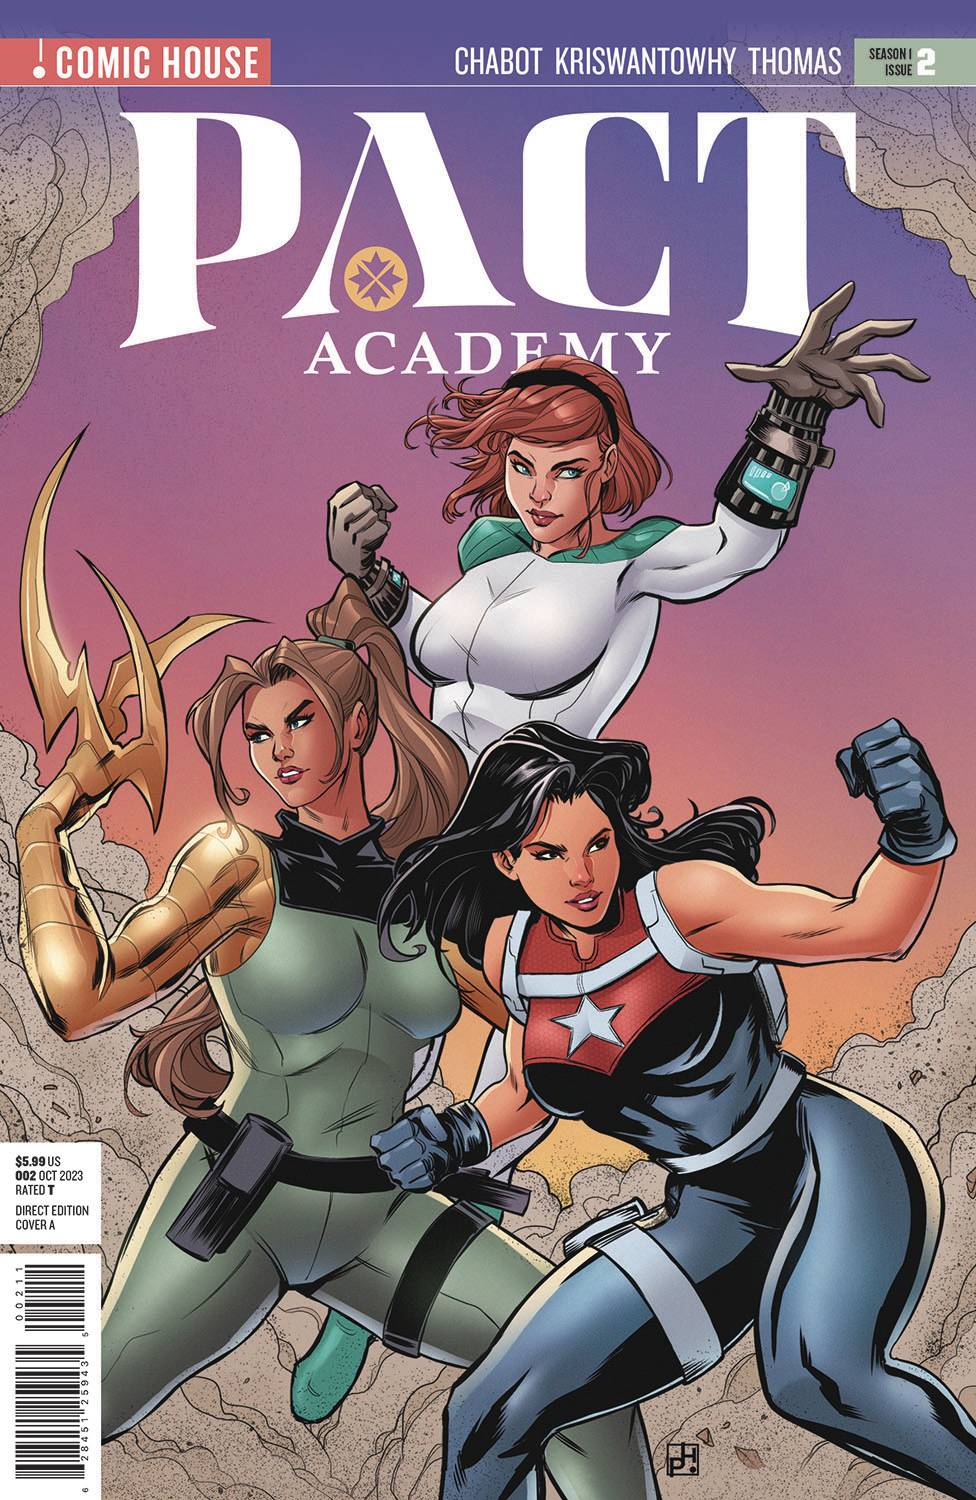 PACT ACADEMY #2 (OF 4)